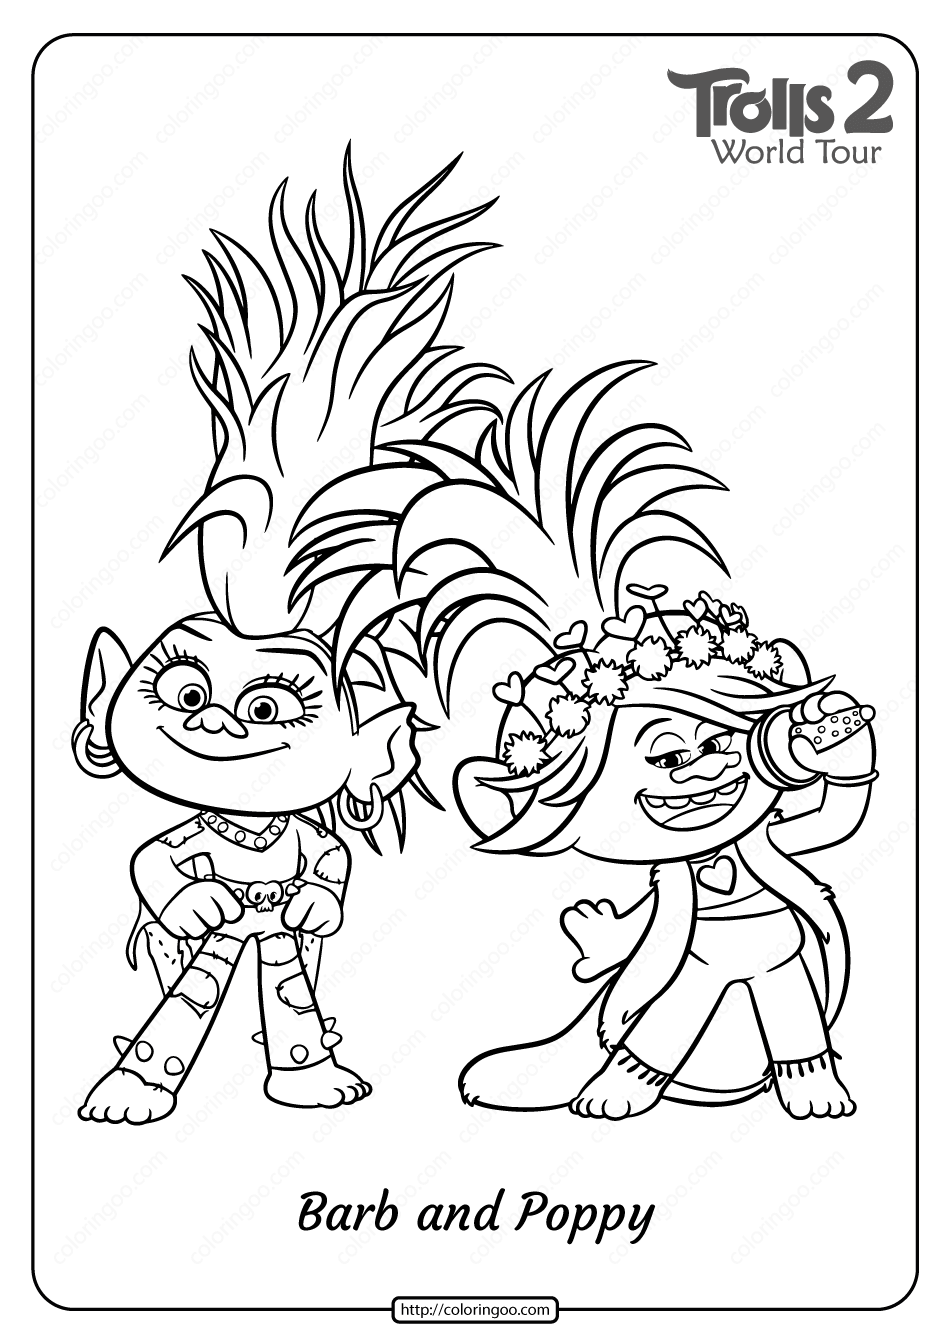 Printable Trolls 2 Barb And Poppy Pdf Coloring Page Poppy Coloring Page Detailed Colo